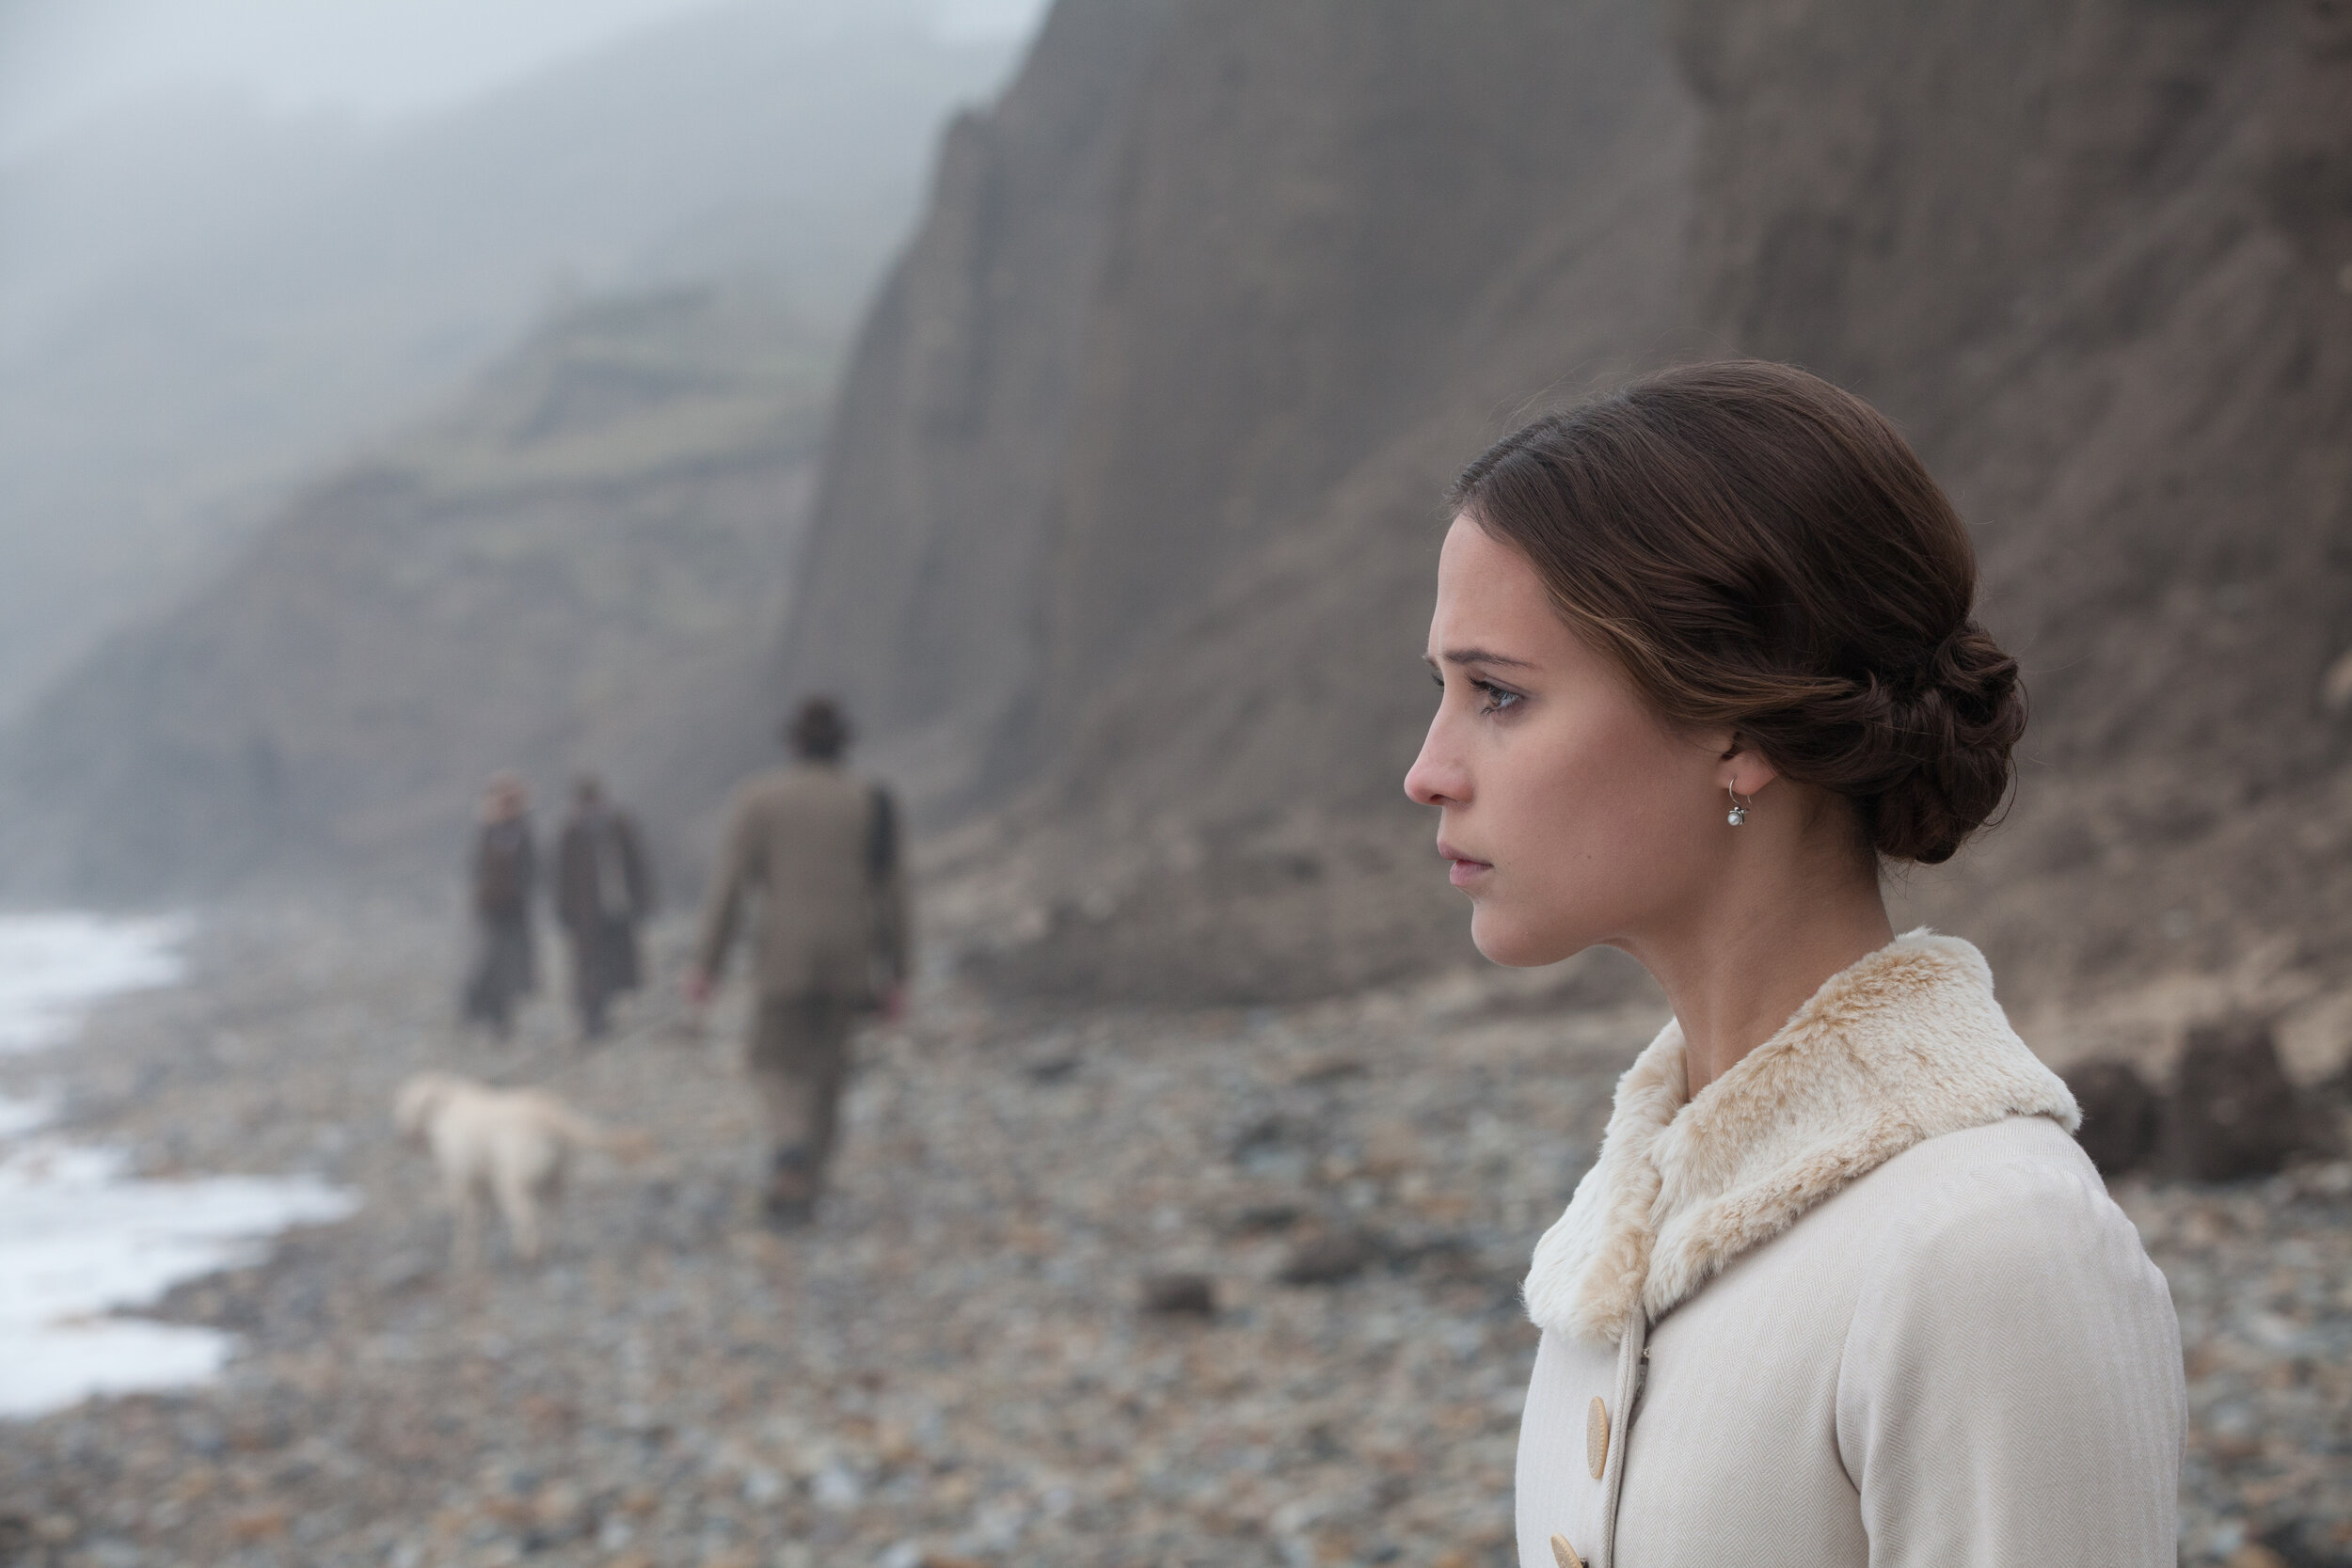 TESTAMENT OF YOUTH (Personal to Alicia Vikander)